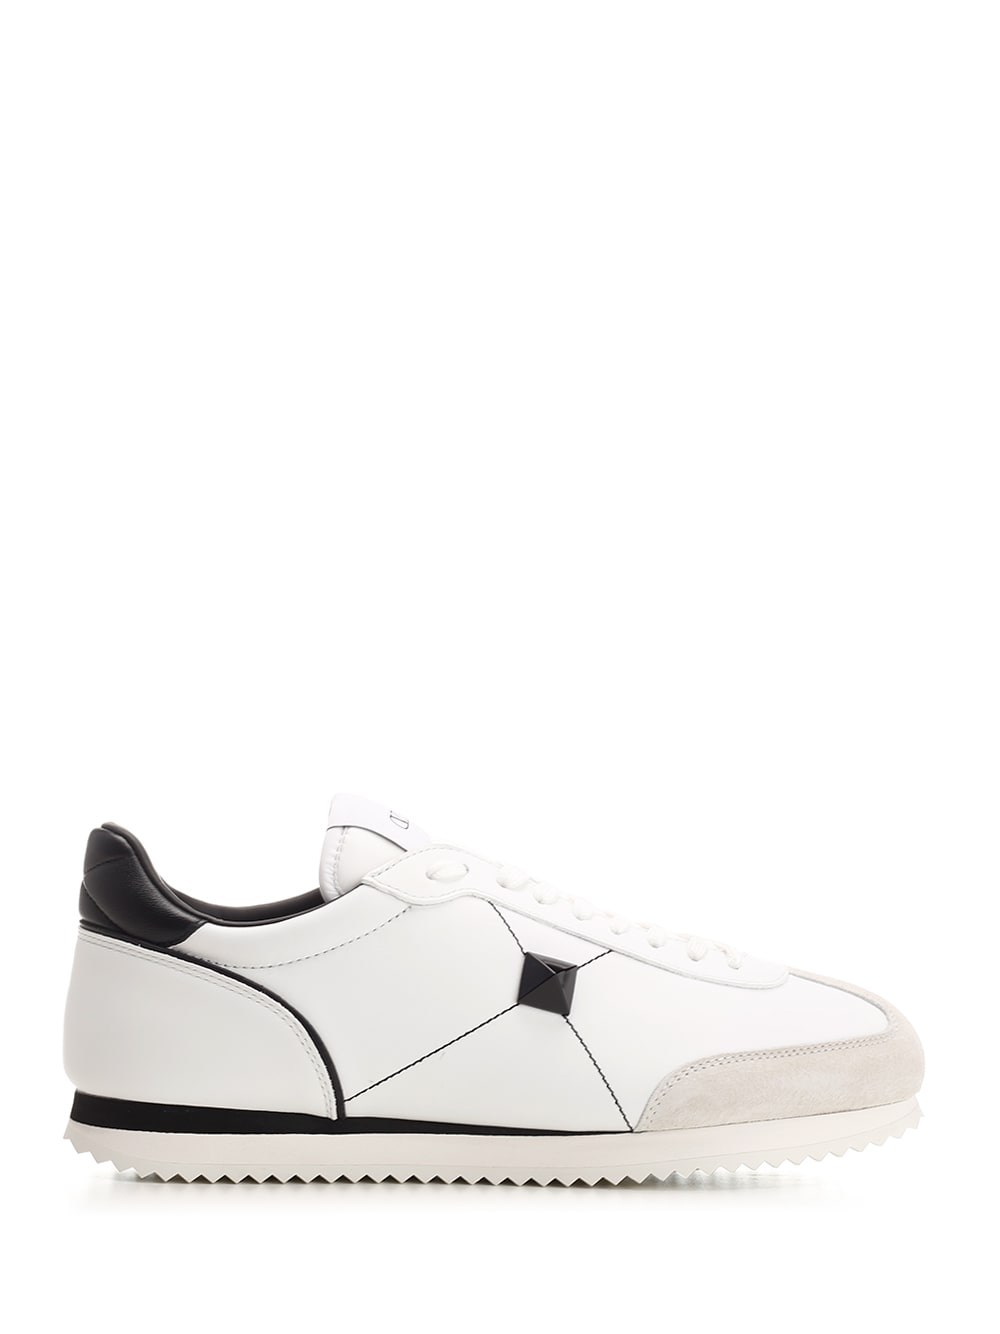 Valentino Garavani White Low Top Trainers In Calf Leather And Nappa Leather